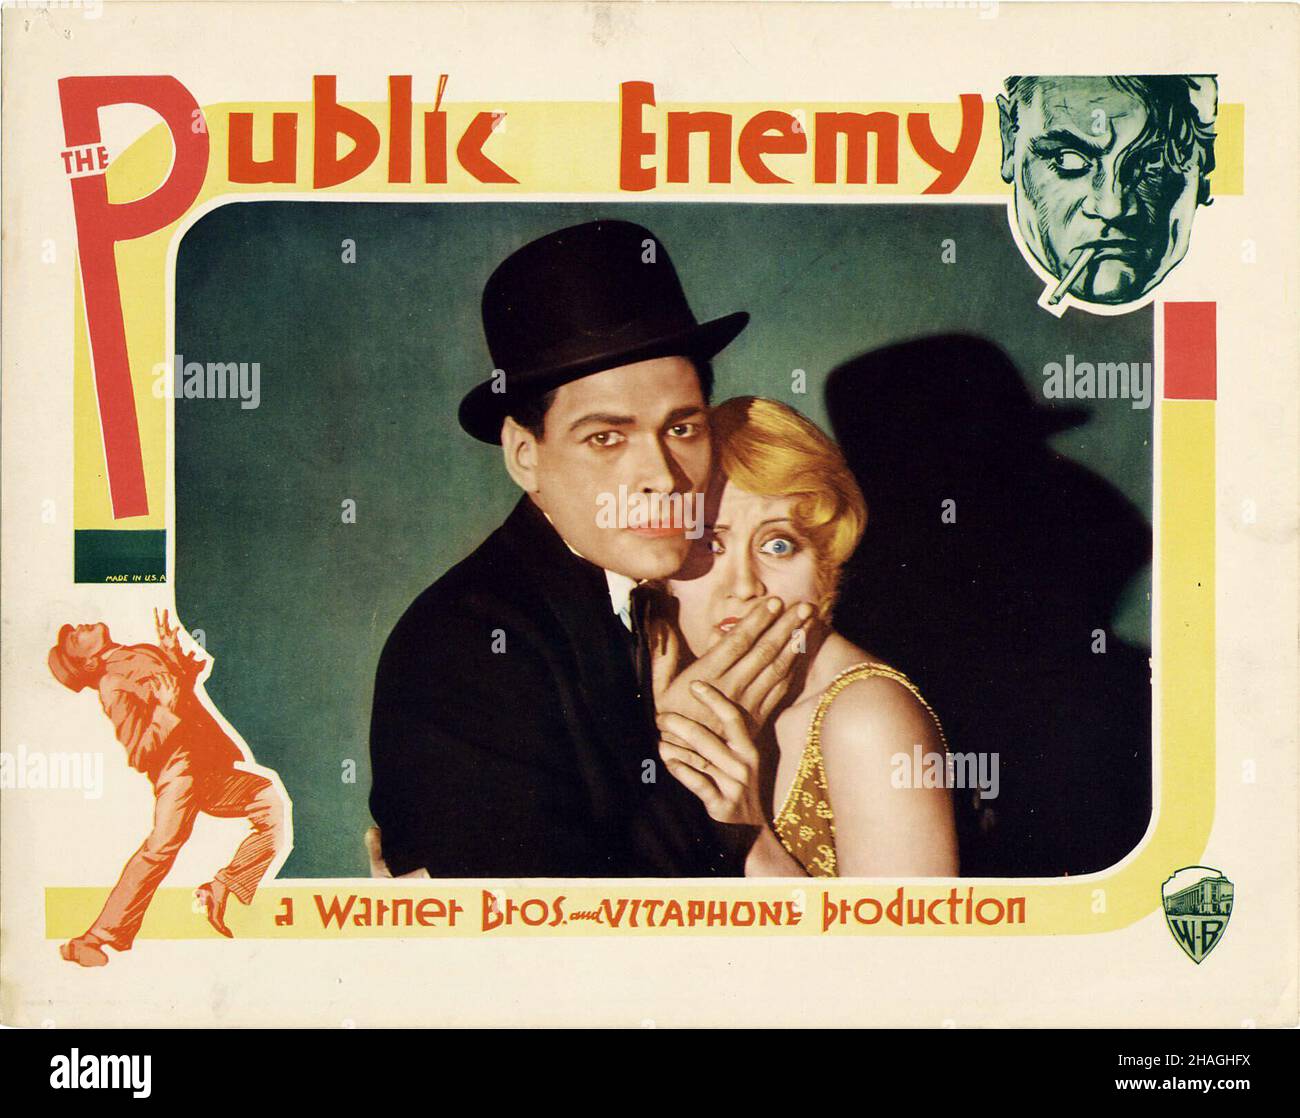 JAMES CAGNEY, JOAN BLONDELL and EDWARD WOODS in THE PUBLIC ENEMY (1931), directed by WILLIAM A. WELLMAN. Credit: WARNER BROTHERS / Album Stock Photo